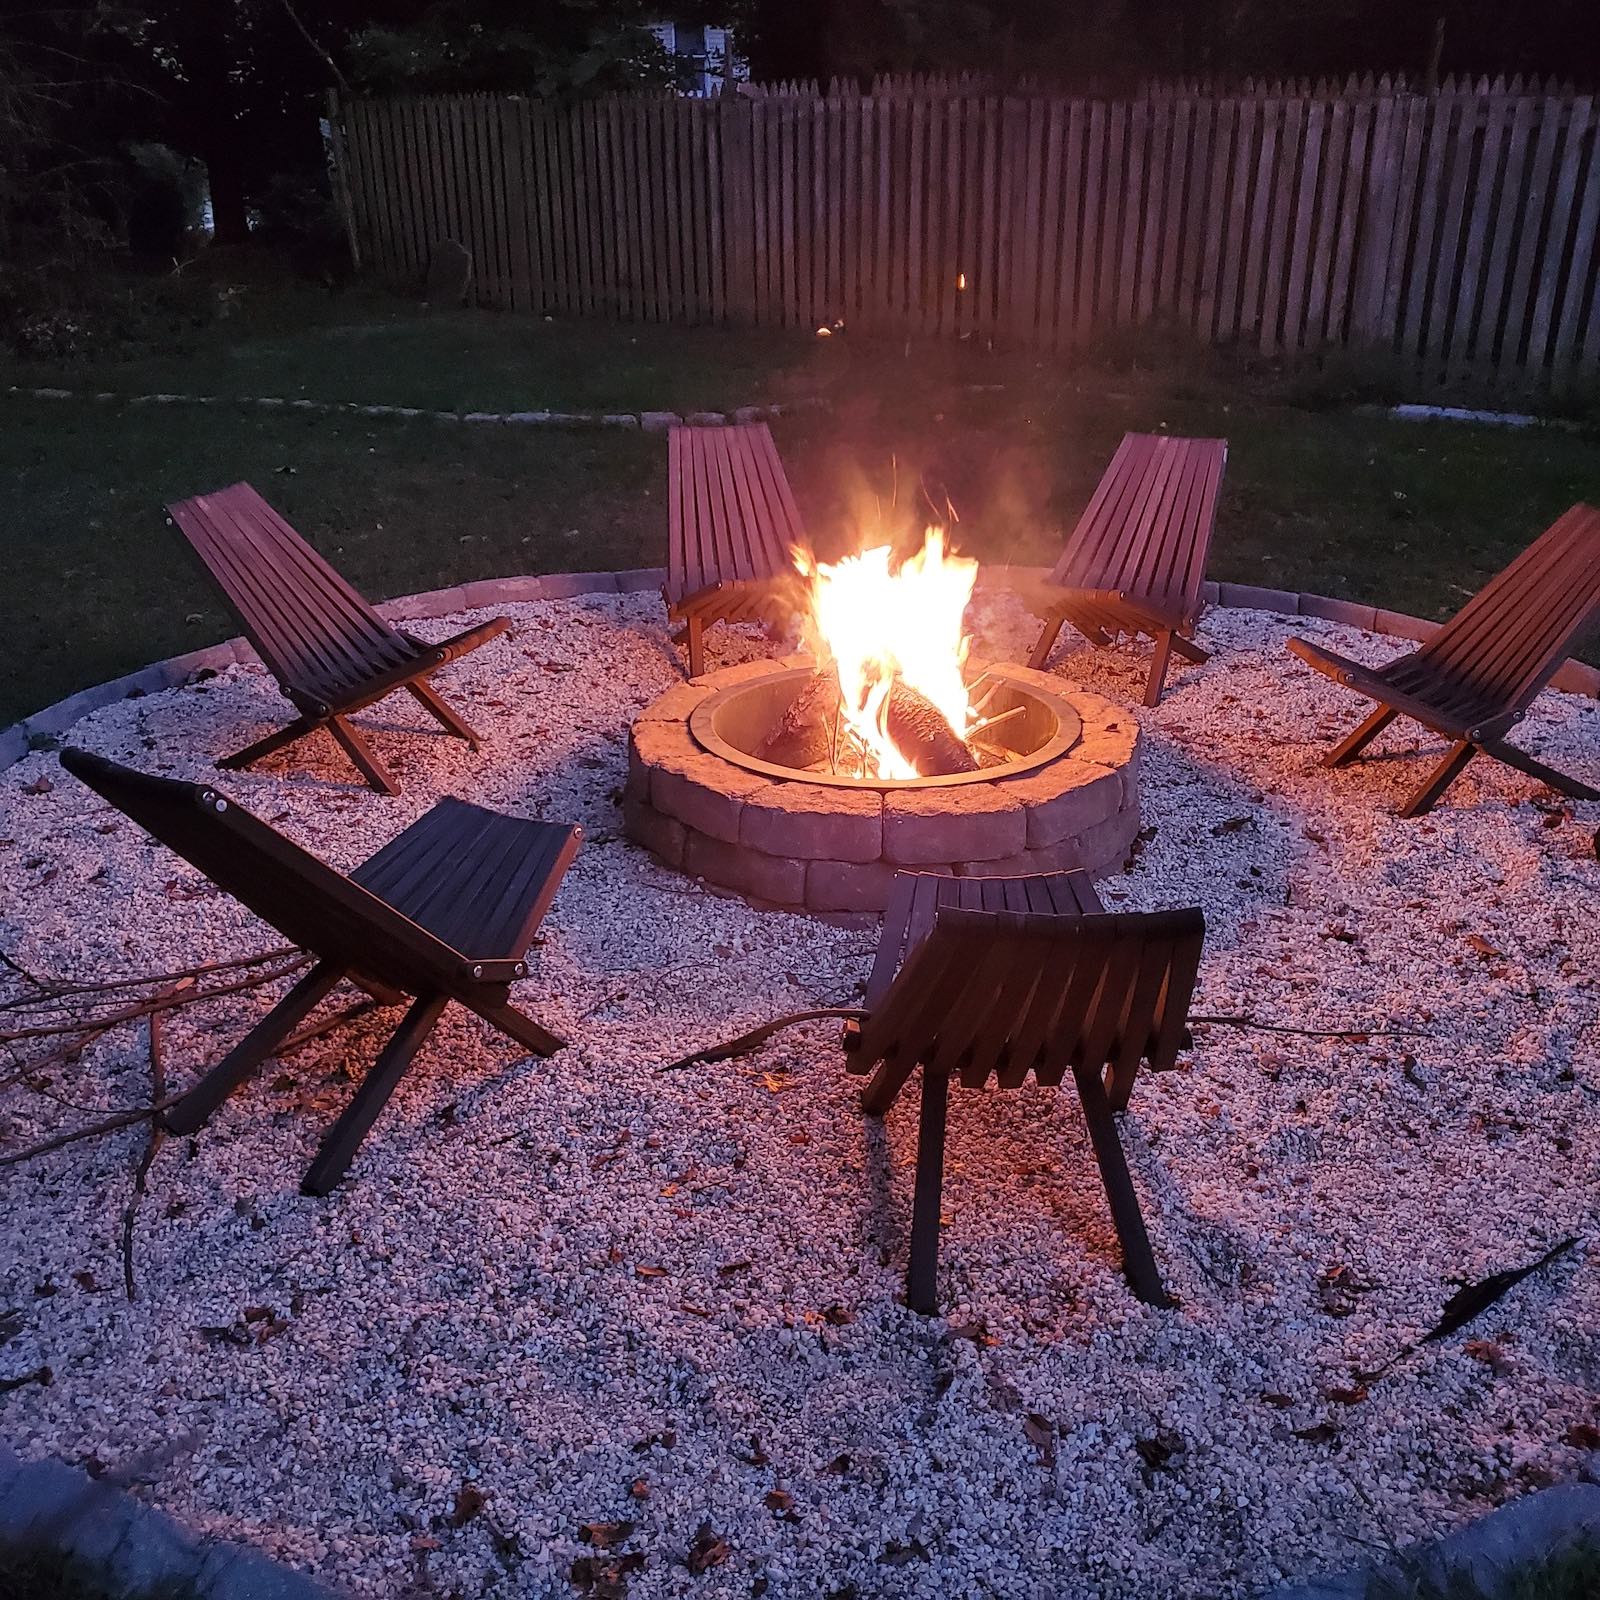 10 Questions to Ask Before Starting a Fire This Summer